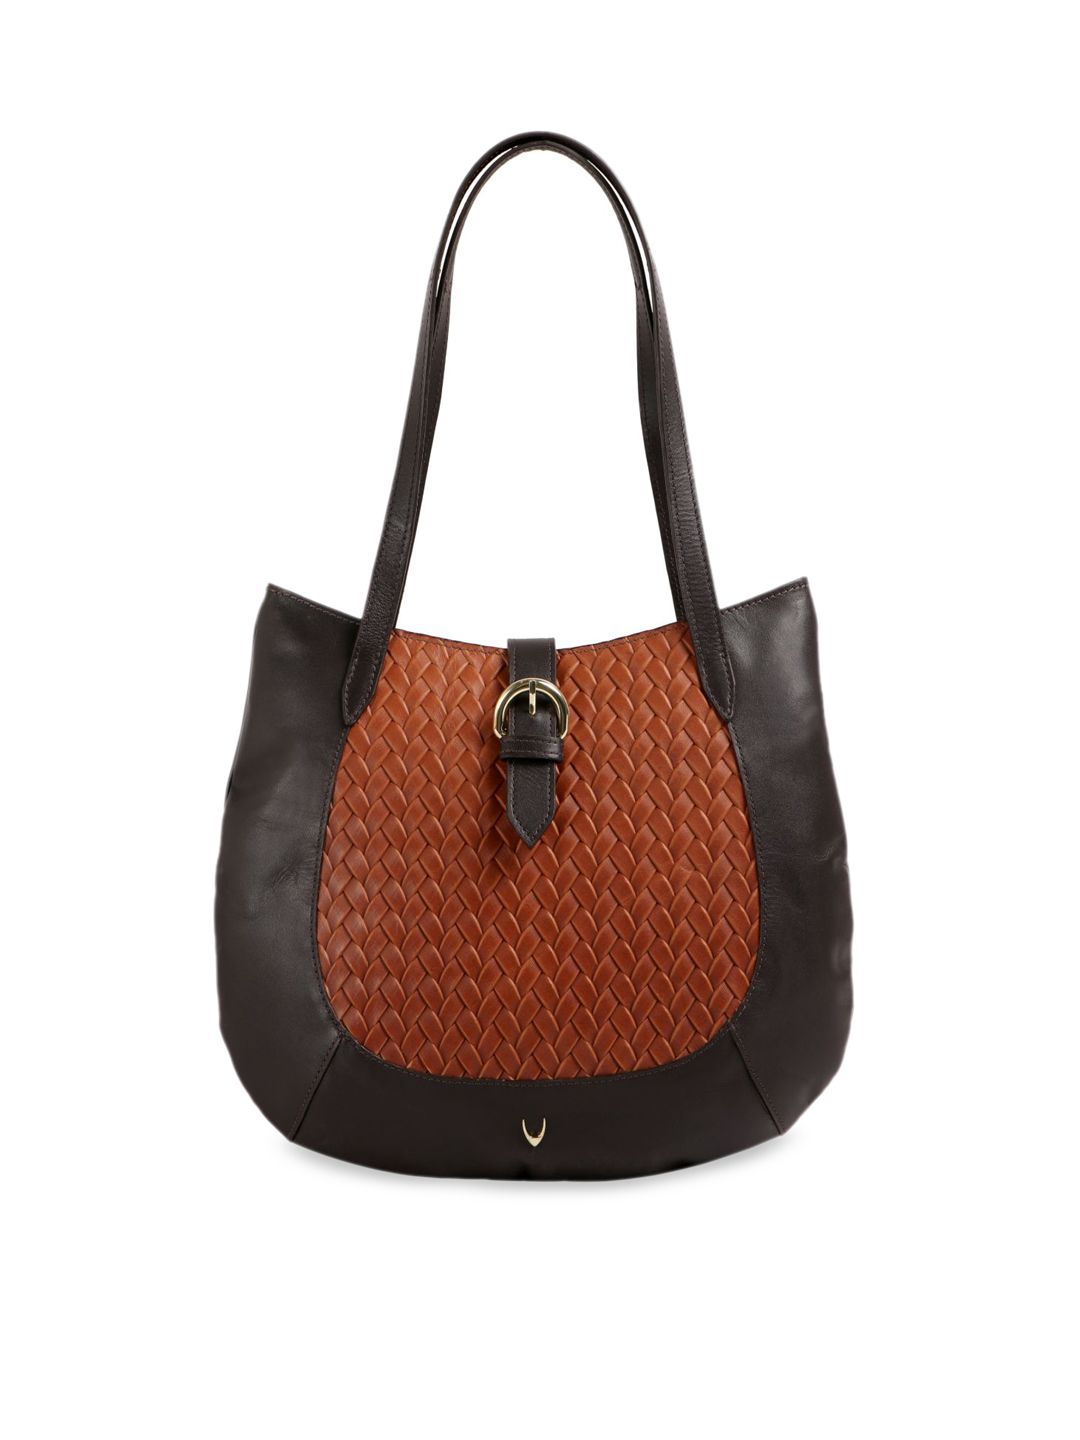 Hidesign Tan & Coffee Brown Colourblocked Leather Shoulder Bag Price in India